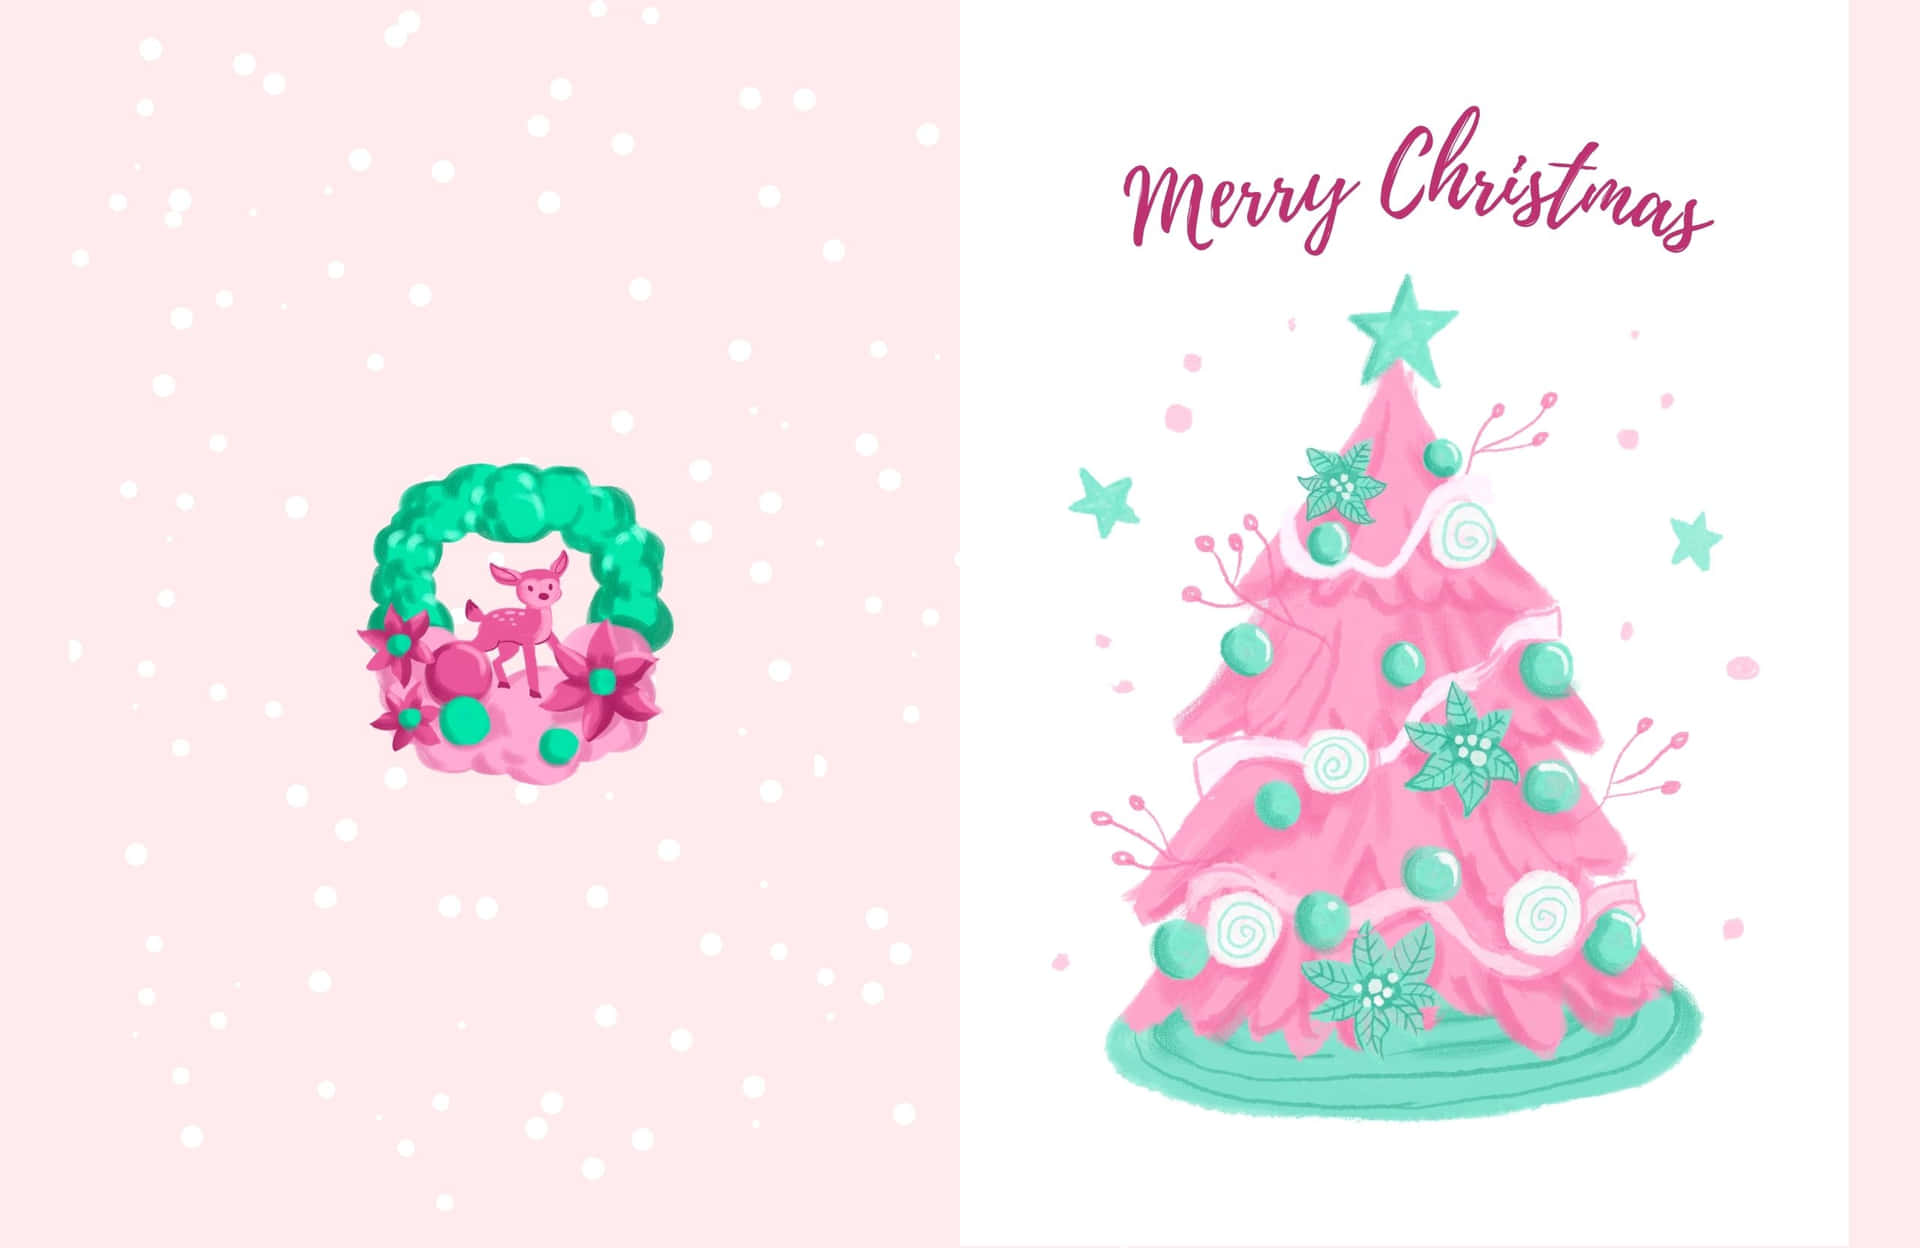 Enjoy the Christmas holidays with a festive pink background